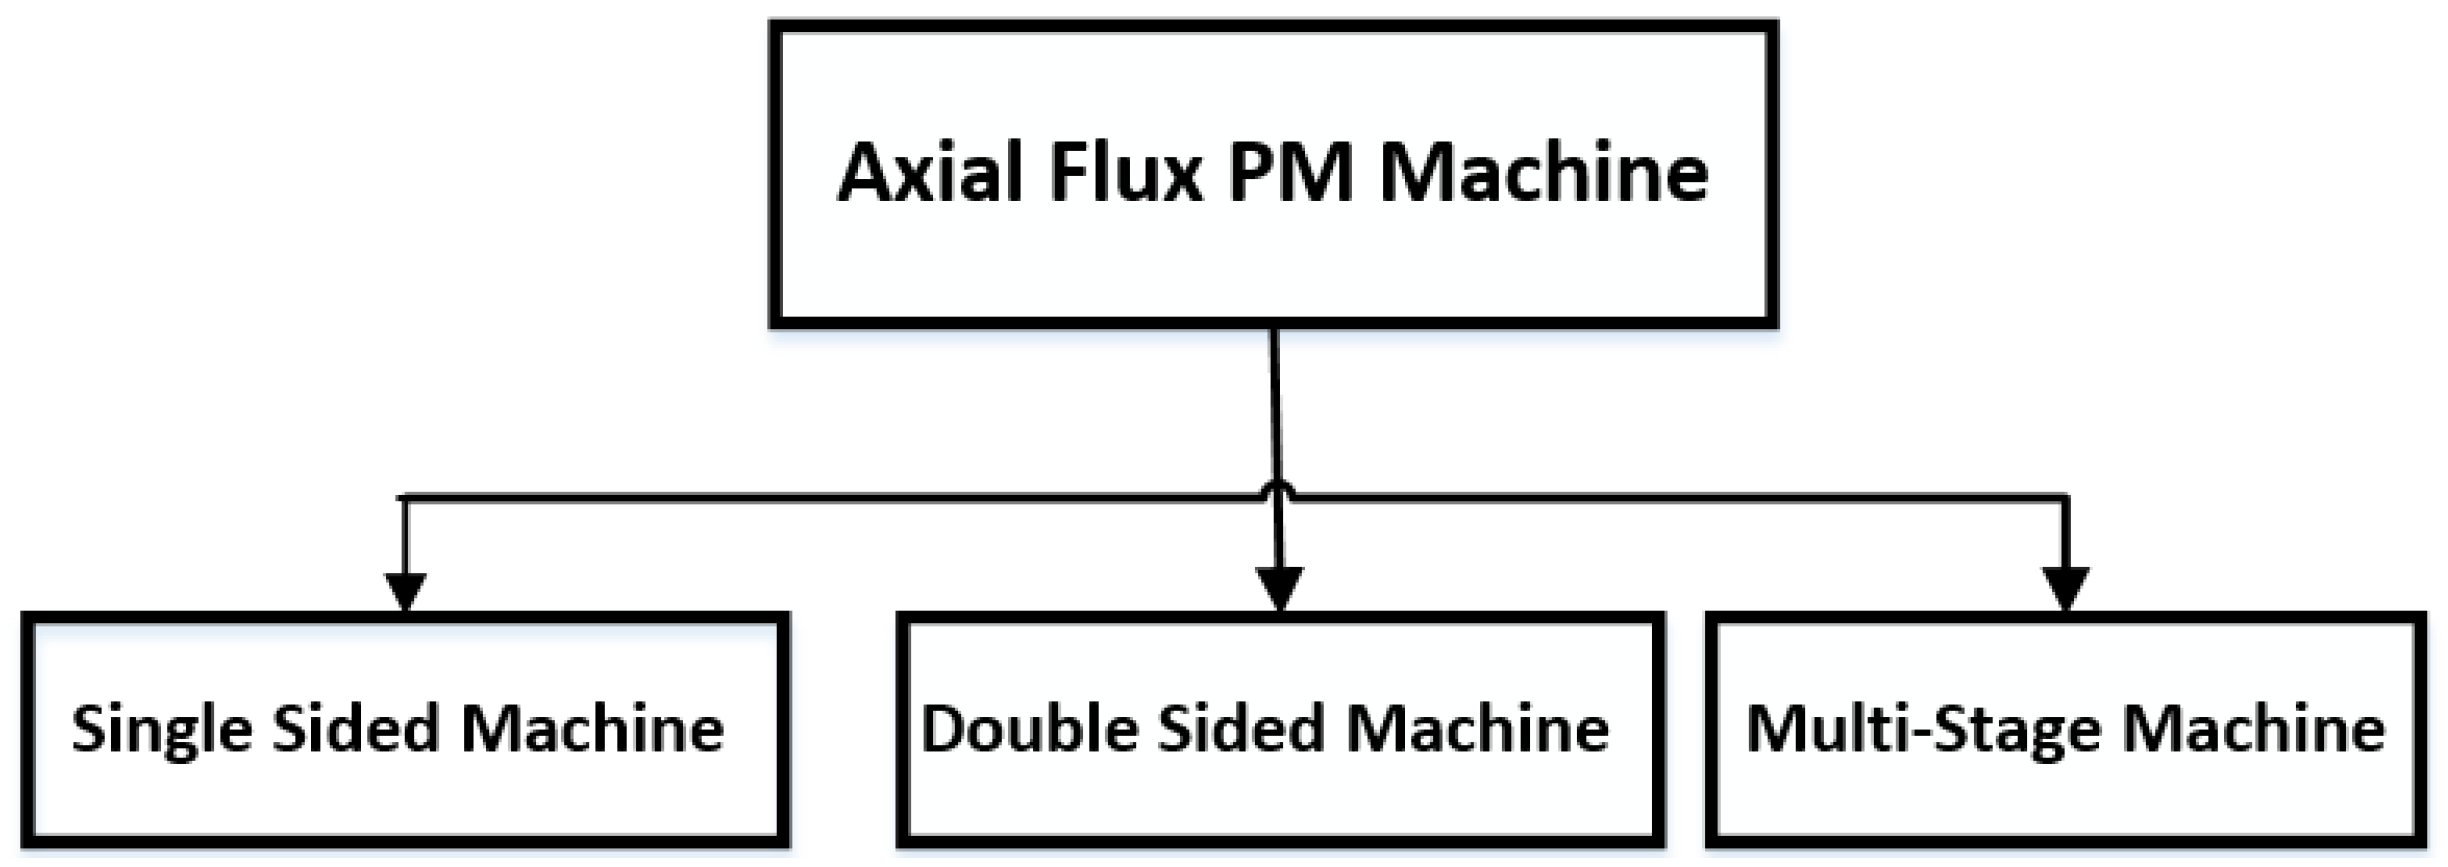 Preferable PMSM rotor geometry for reduced axial flux components